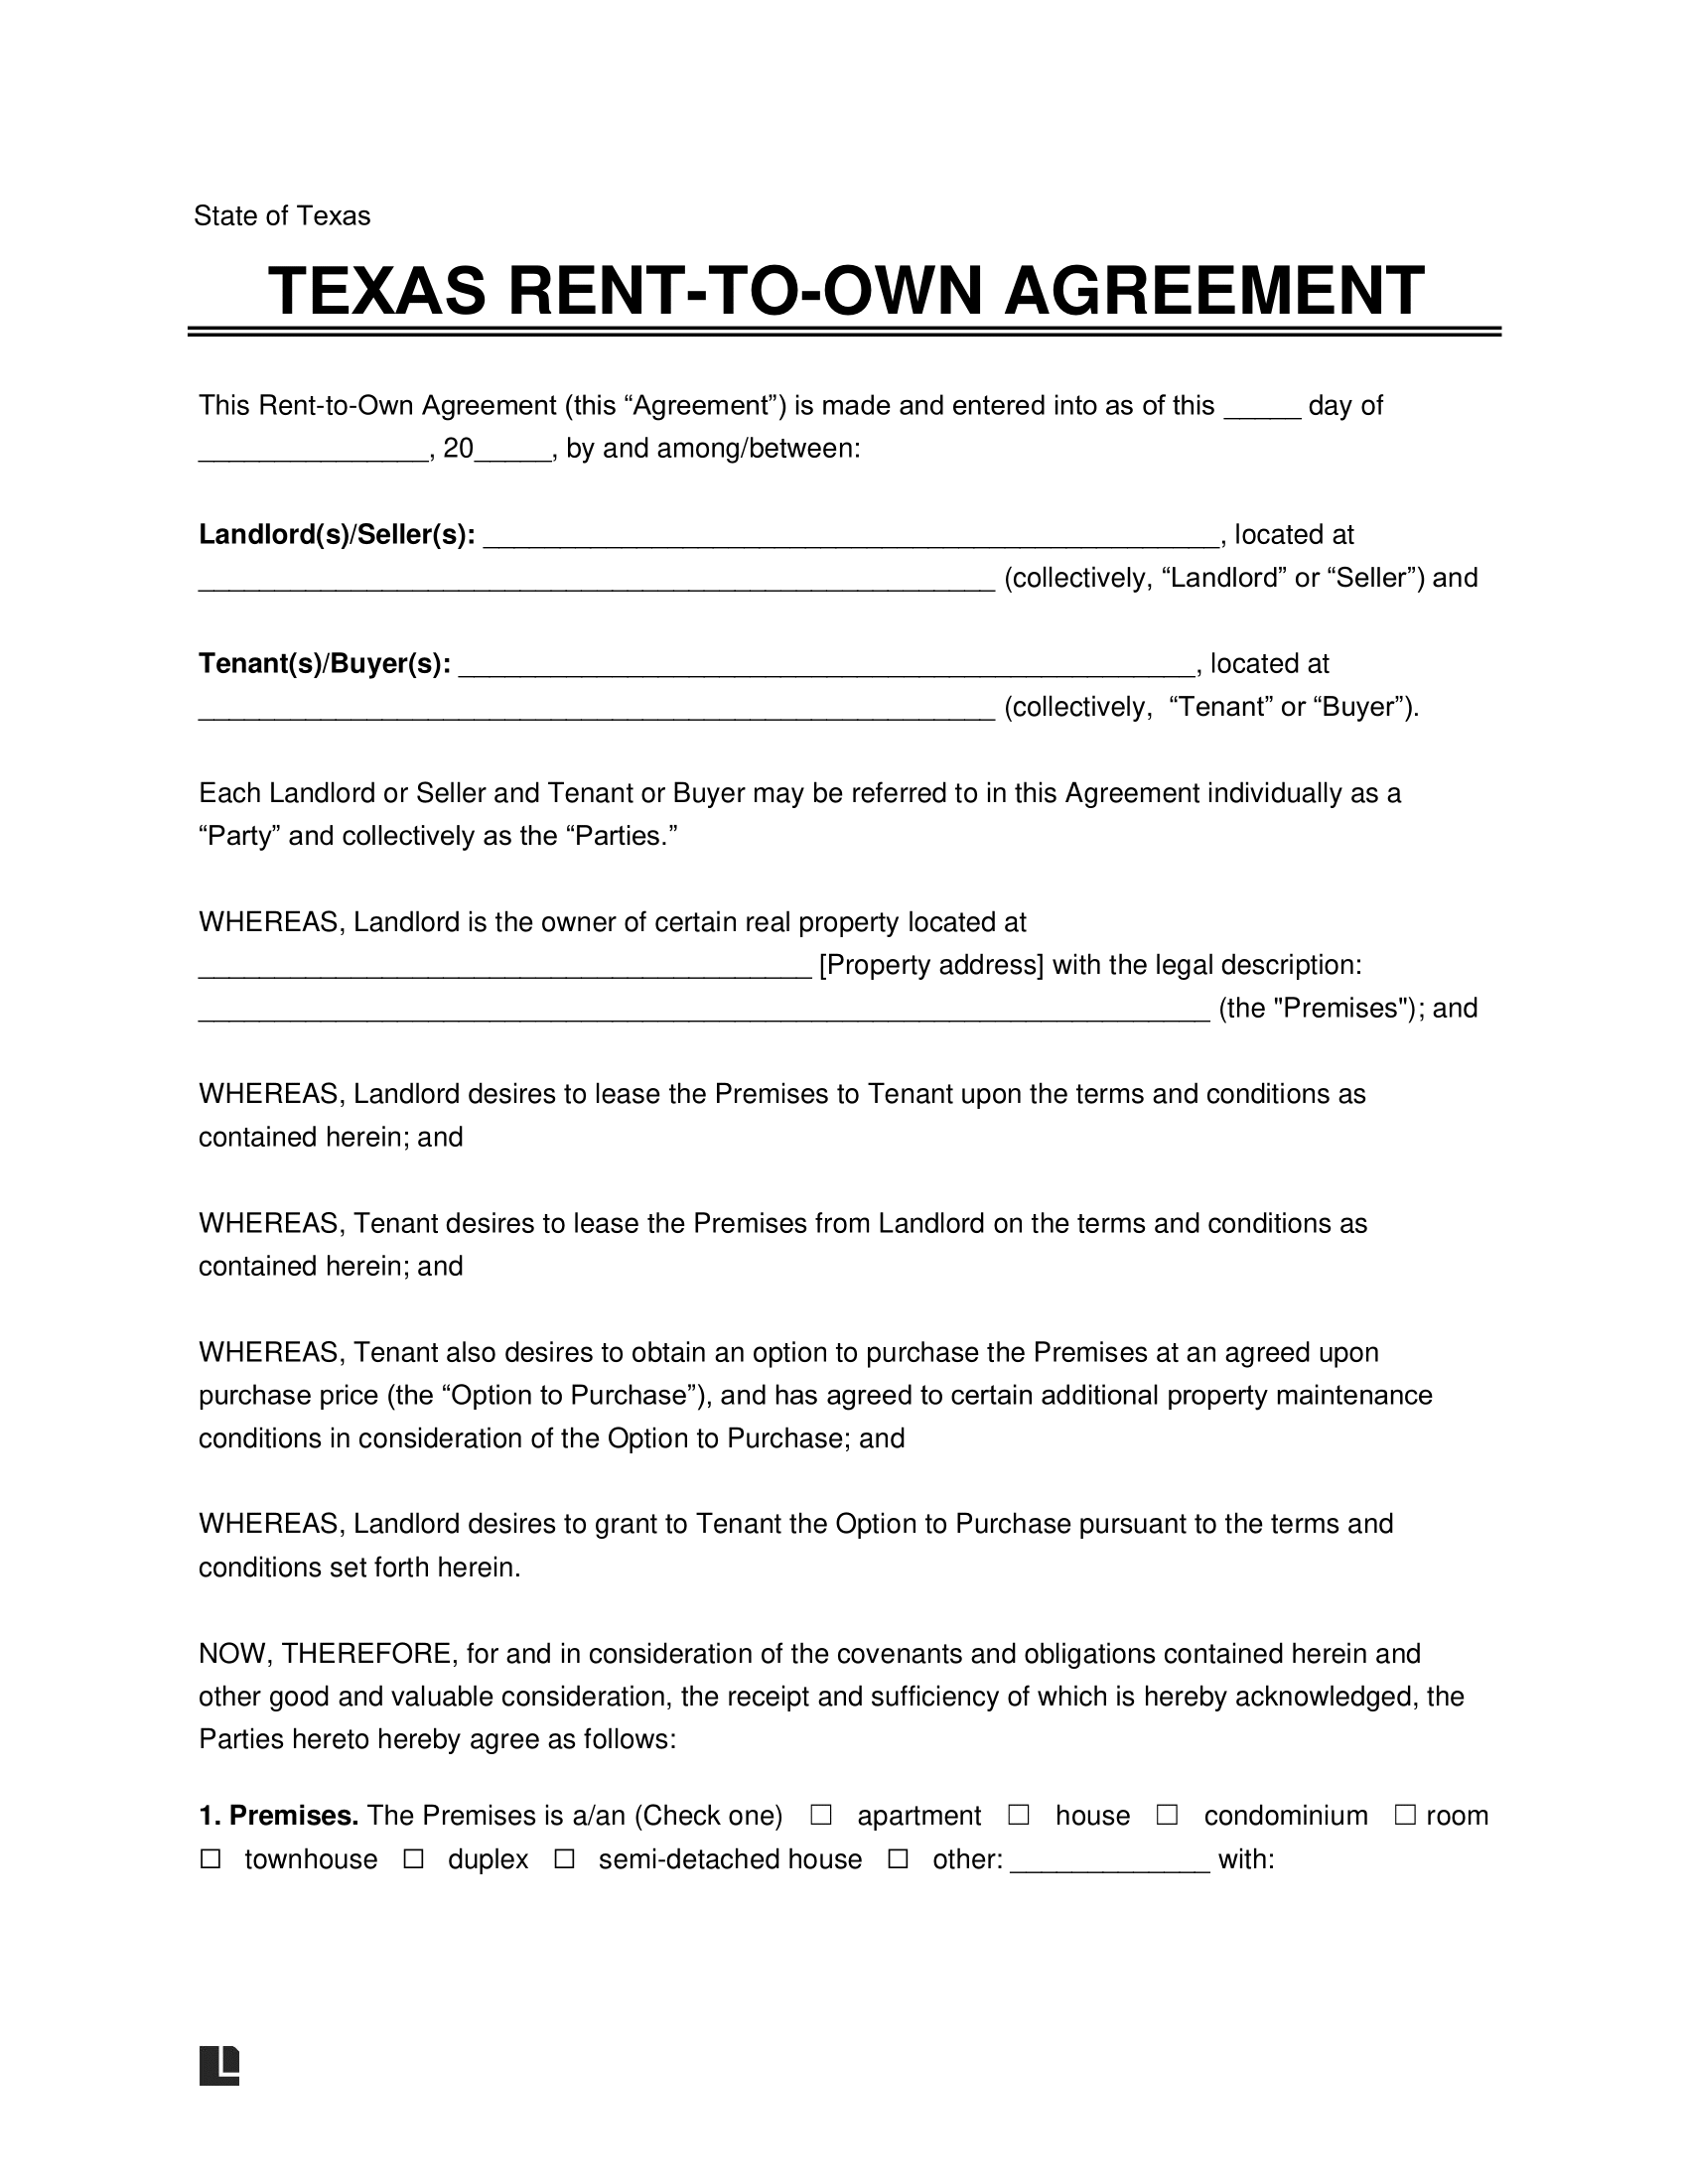 Texas Rent-to-Own Lease Agreement